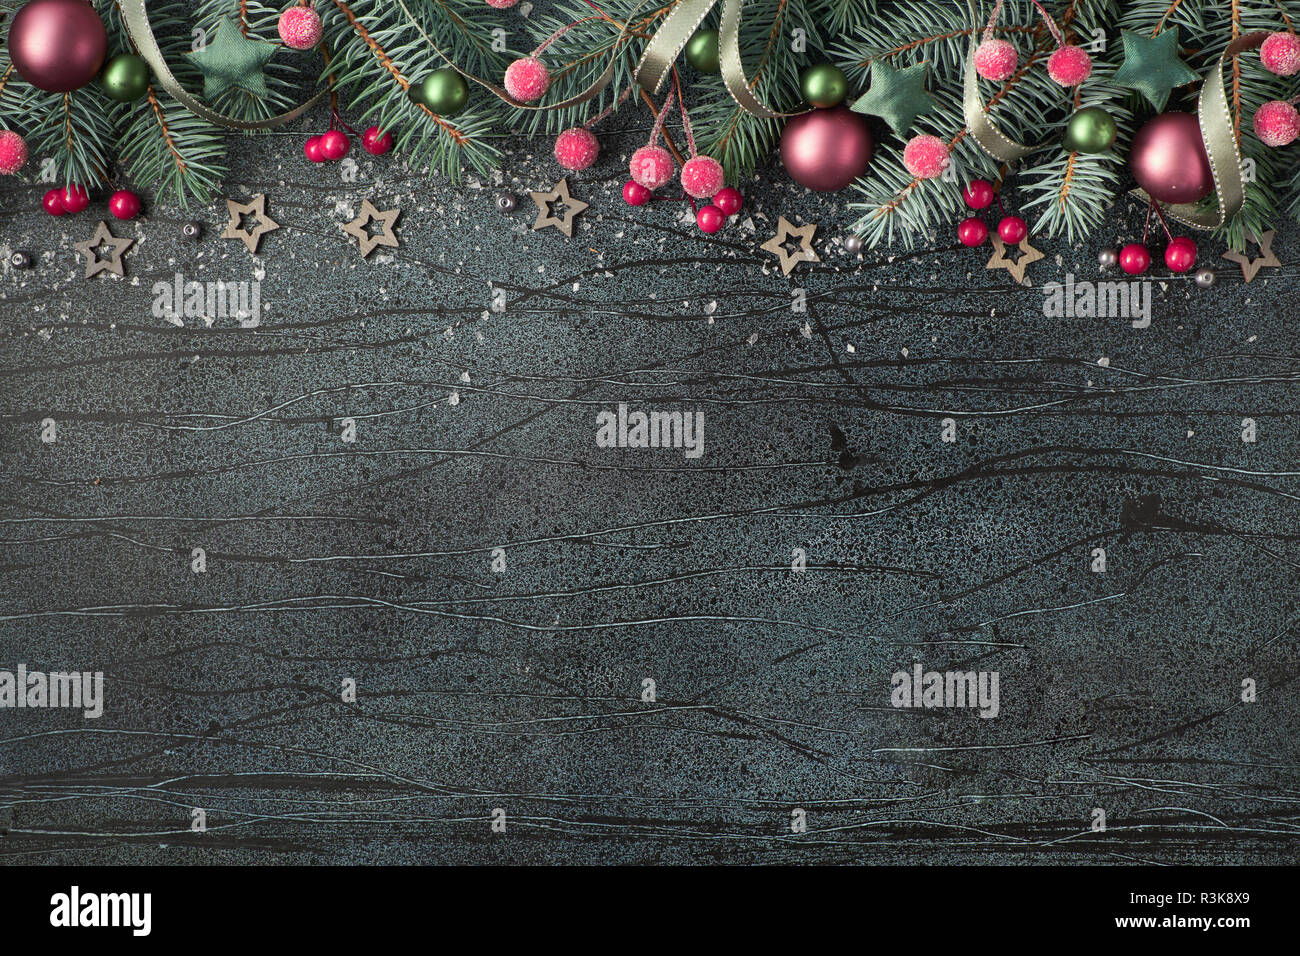 Christmas background with green fir twigs, red berries and candy canes on textured dark board text space Stock Photo